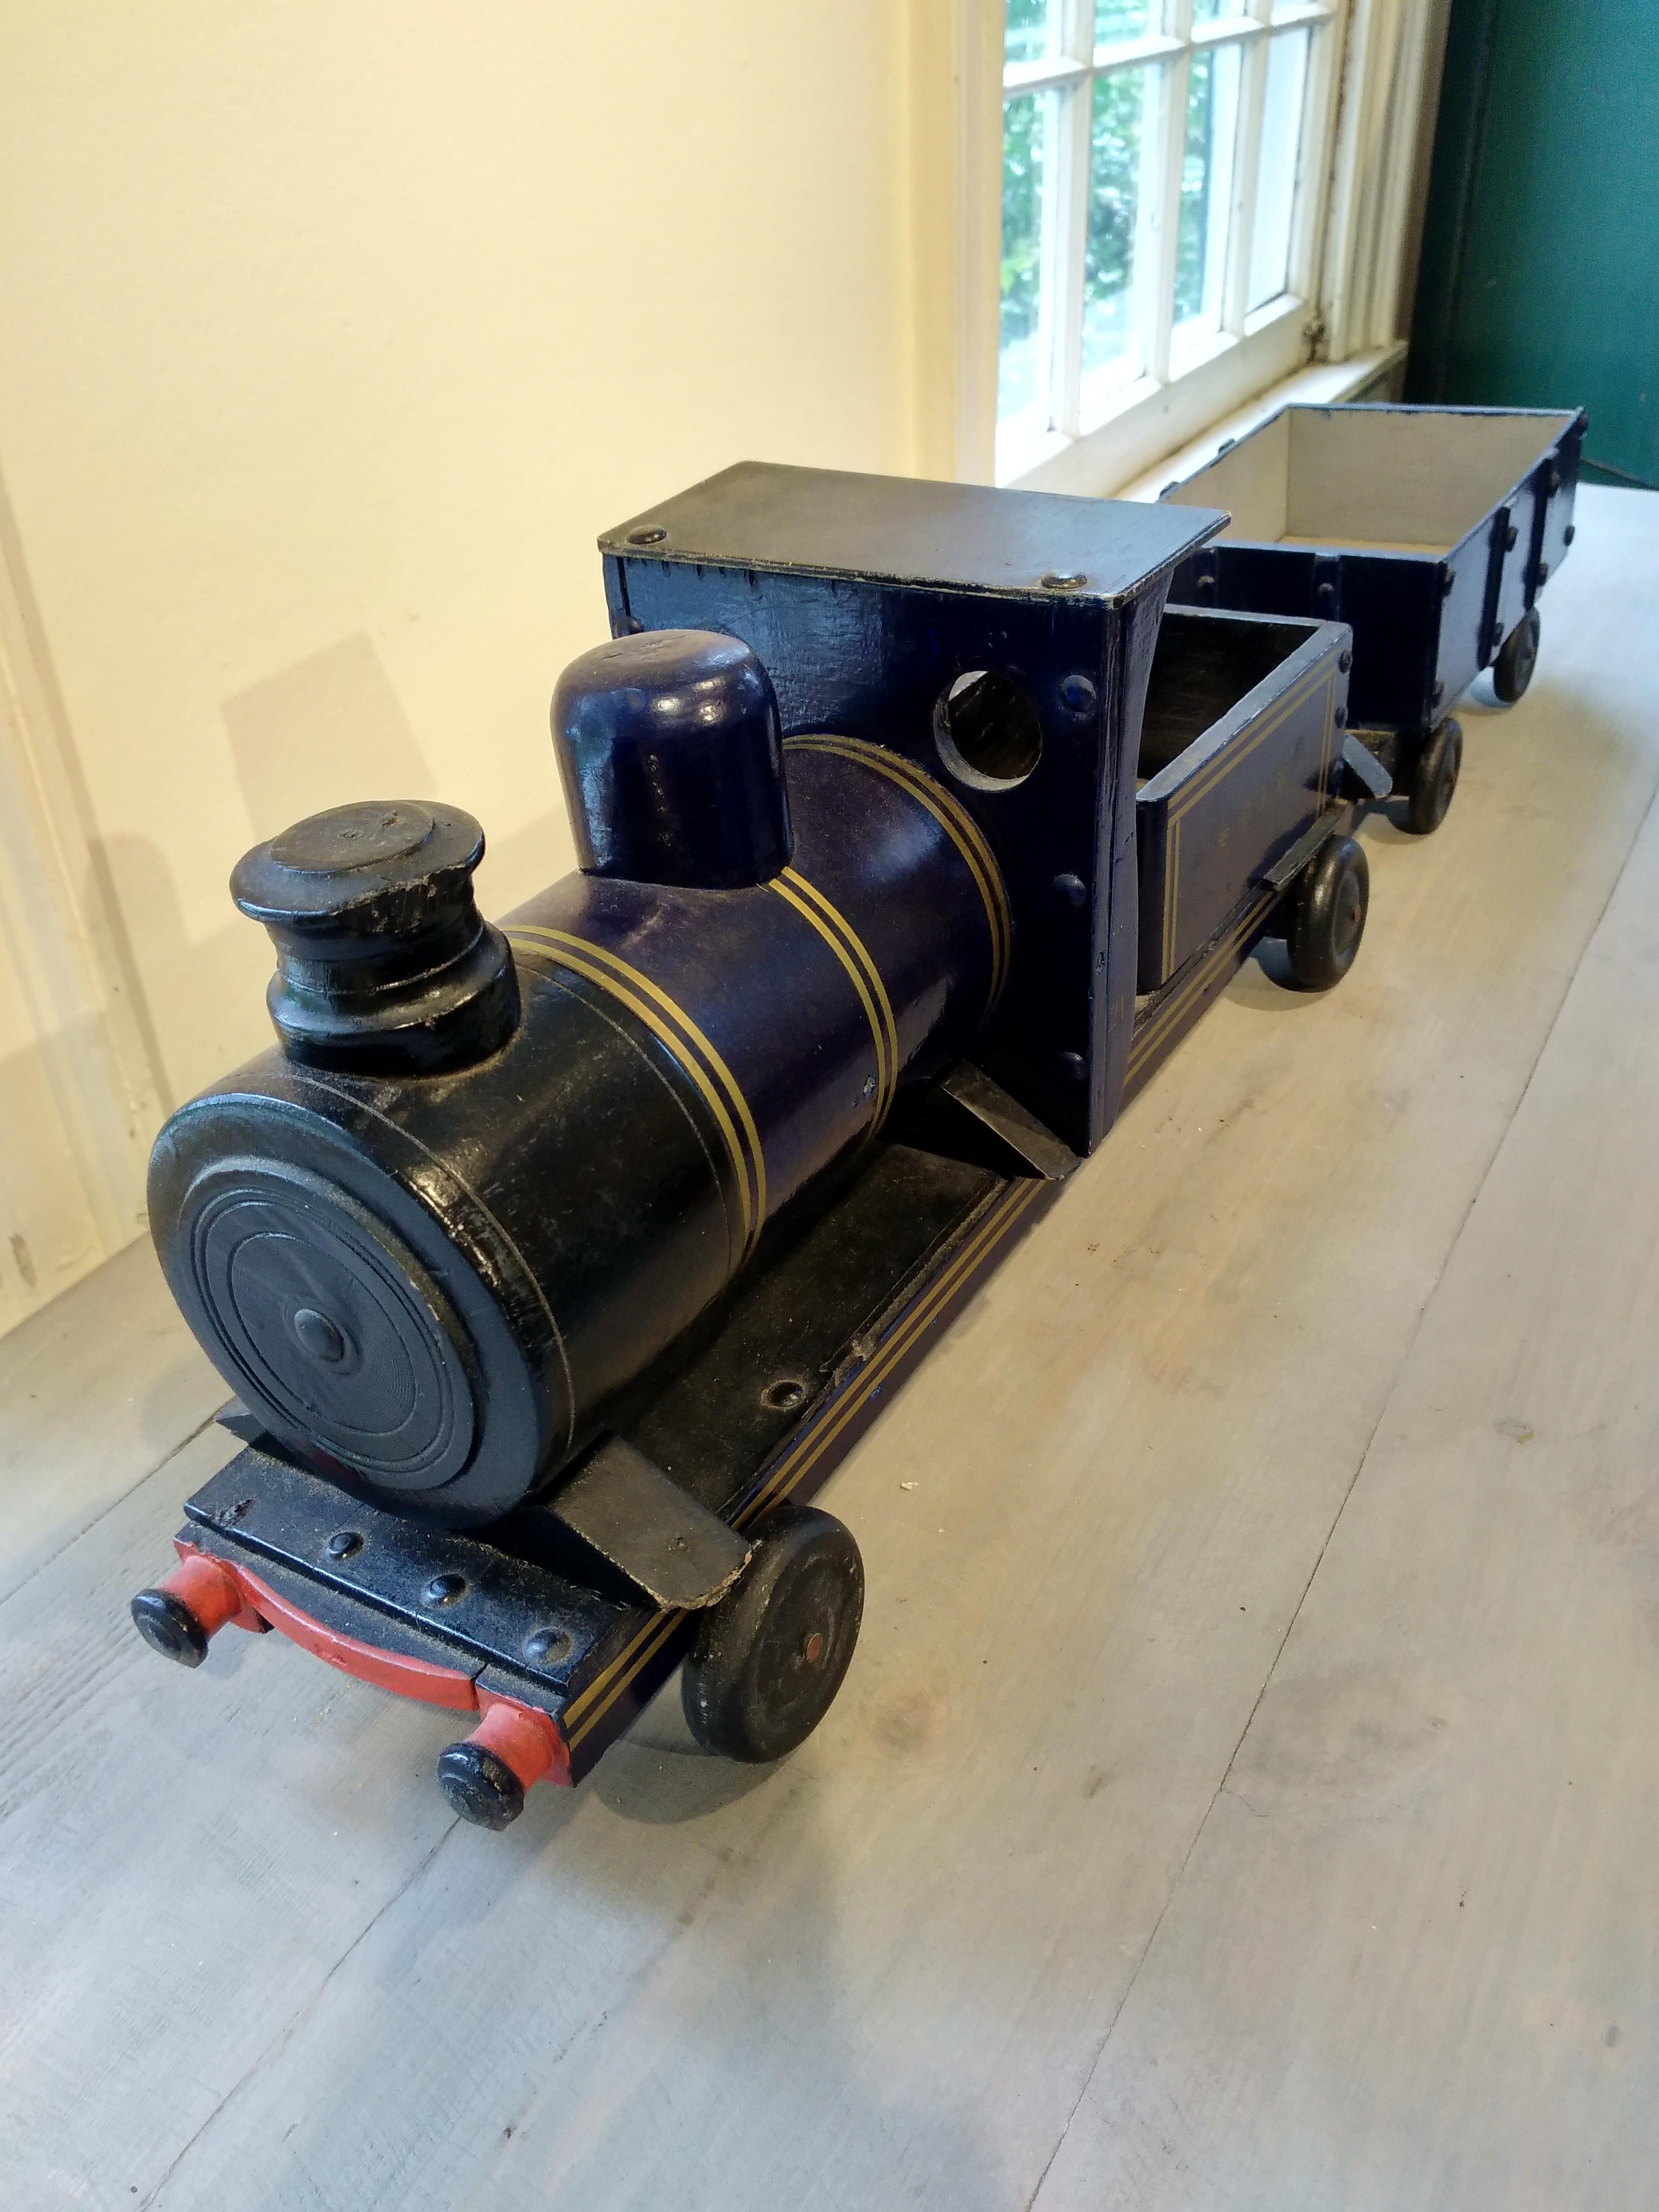 A very sweet antique children's toy train from England, 1940. This two-piece set has a locomotive and matching cargo car. It is made of wood and is painted a charming deep blue.
 